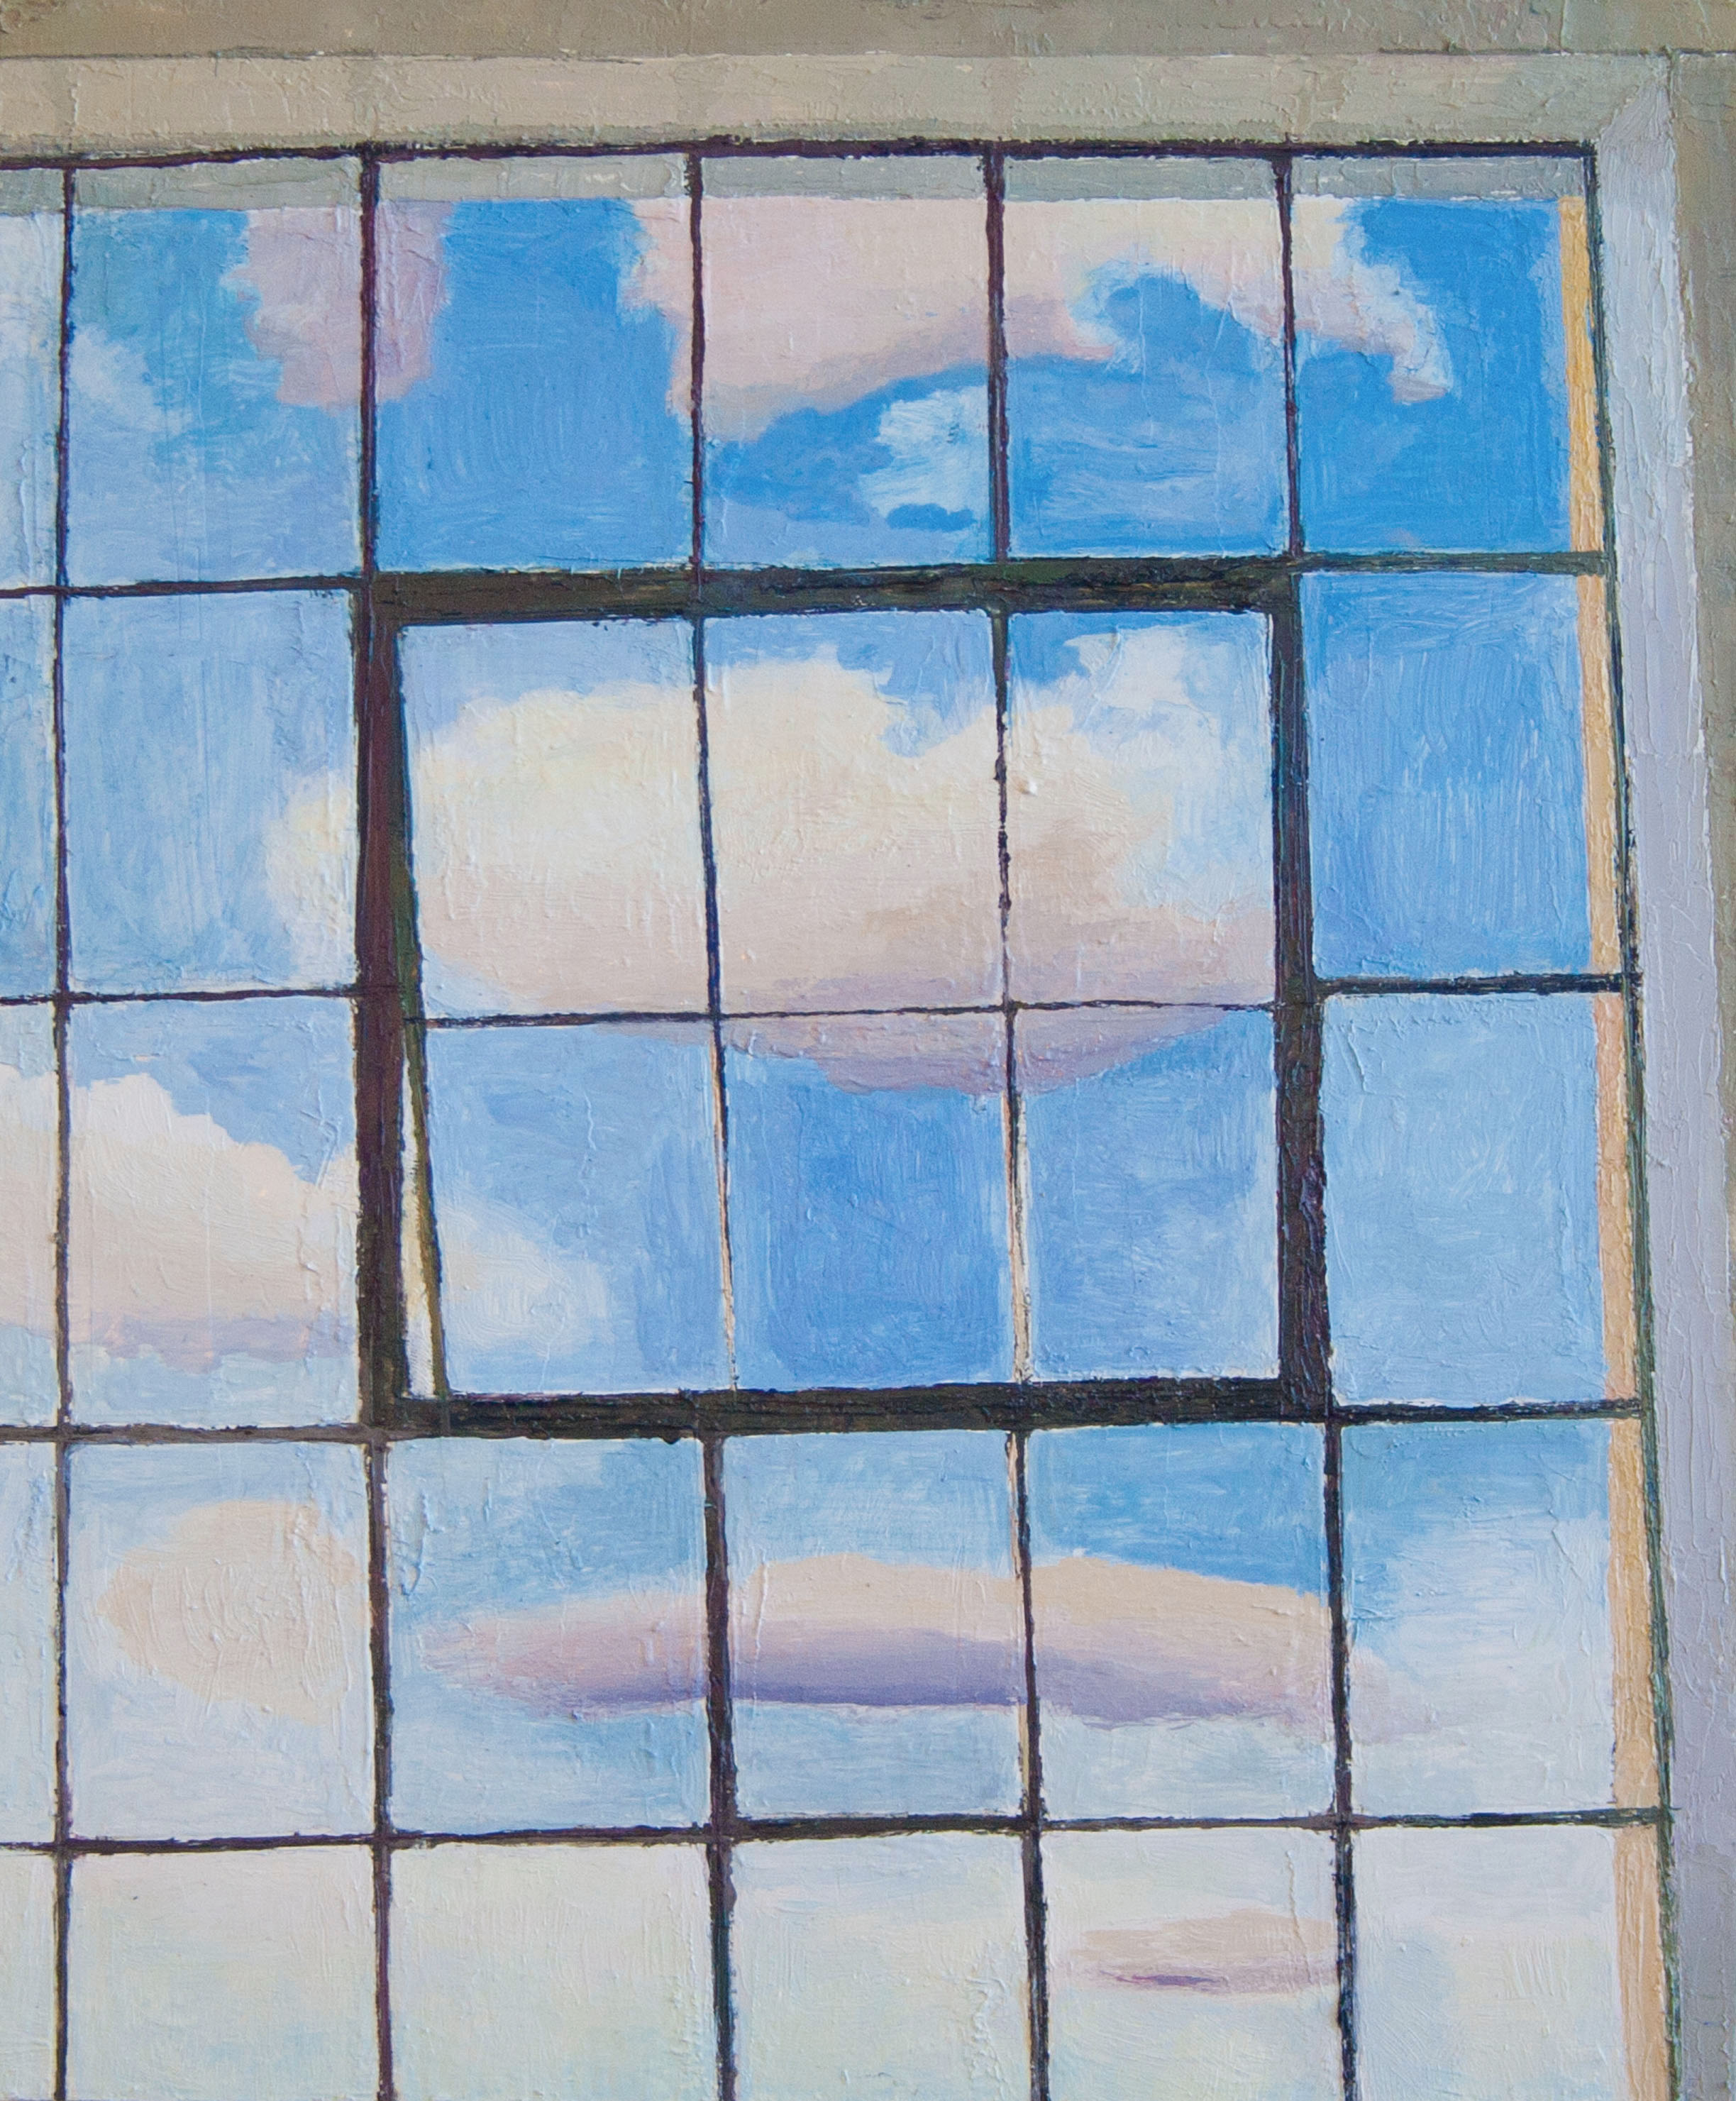 Caught Cloud, Oil on panel, 11x 9 inches, 2014-15